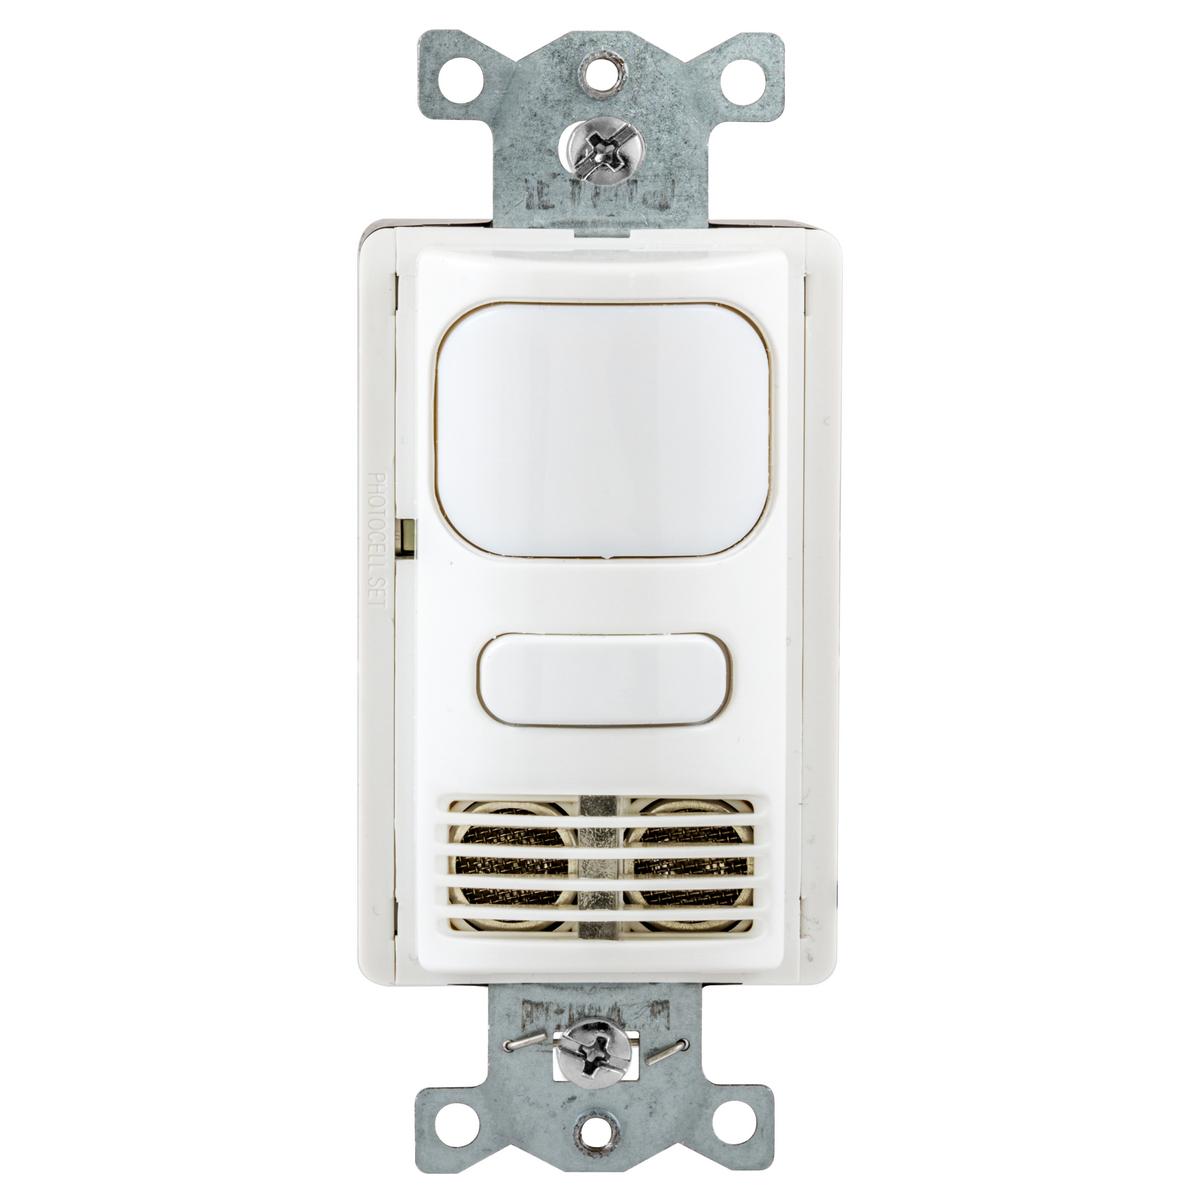 Hubbell AD2241W1 Vacancy Sensors, Wall Switch, AdaptiveDual Technology, 1 Circuit, 24V DC, White 